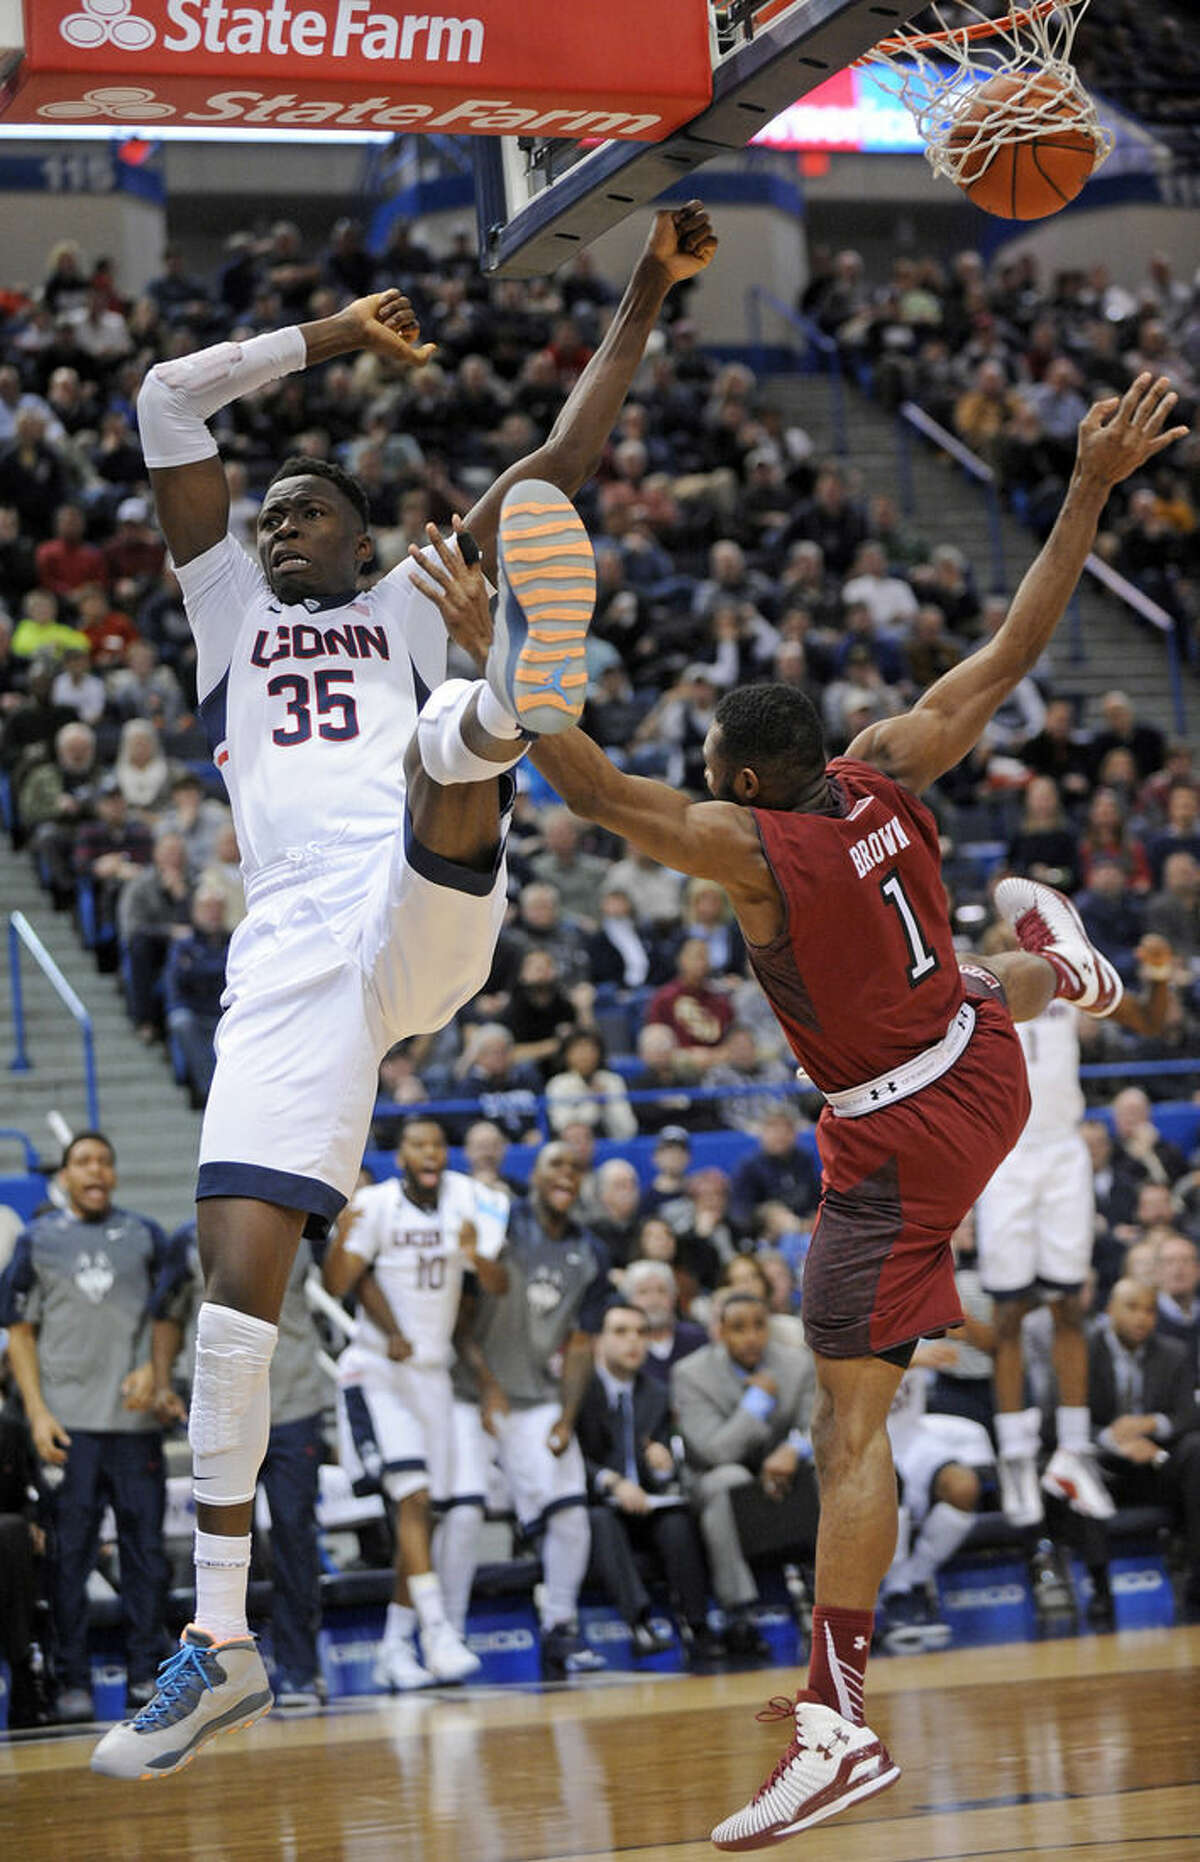 Connecticut's Amida Brimah (35) is fouled by Temple's Josh Brown (1) late in the second half of Temple's 57-53 overtime victory in an NCAA college basketball game in Hartford, Conn., Wednesday, Dec. 31, 2014. (AP Photo/Fred Beckham)